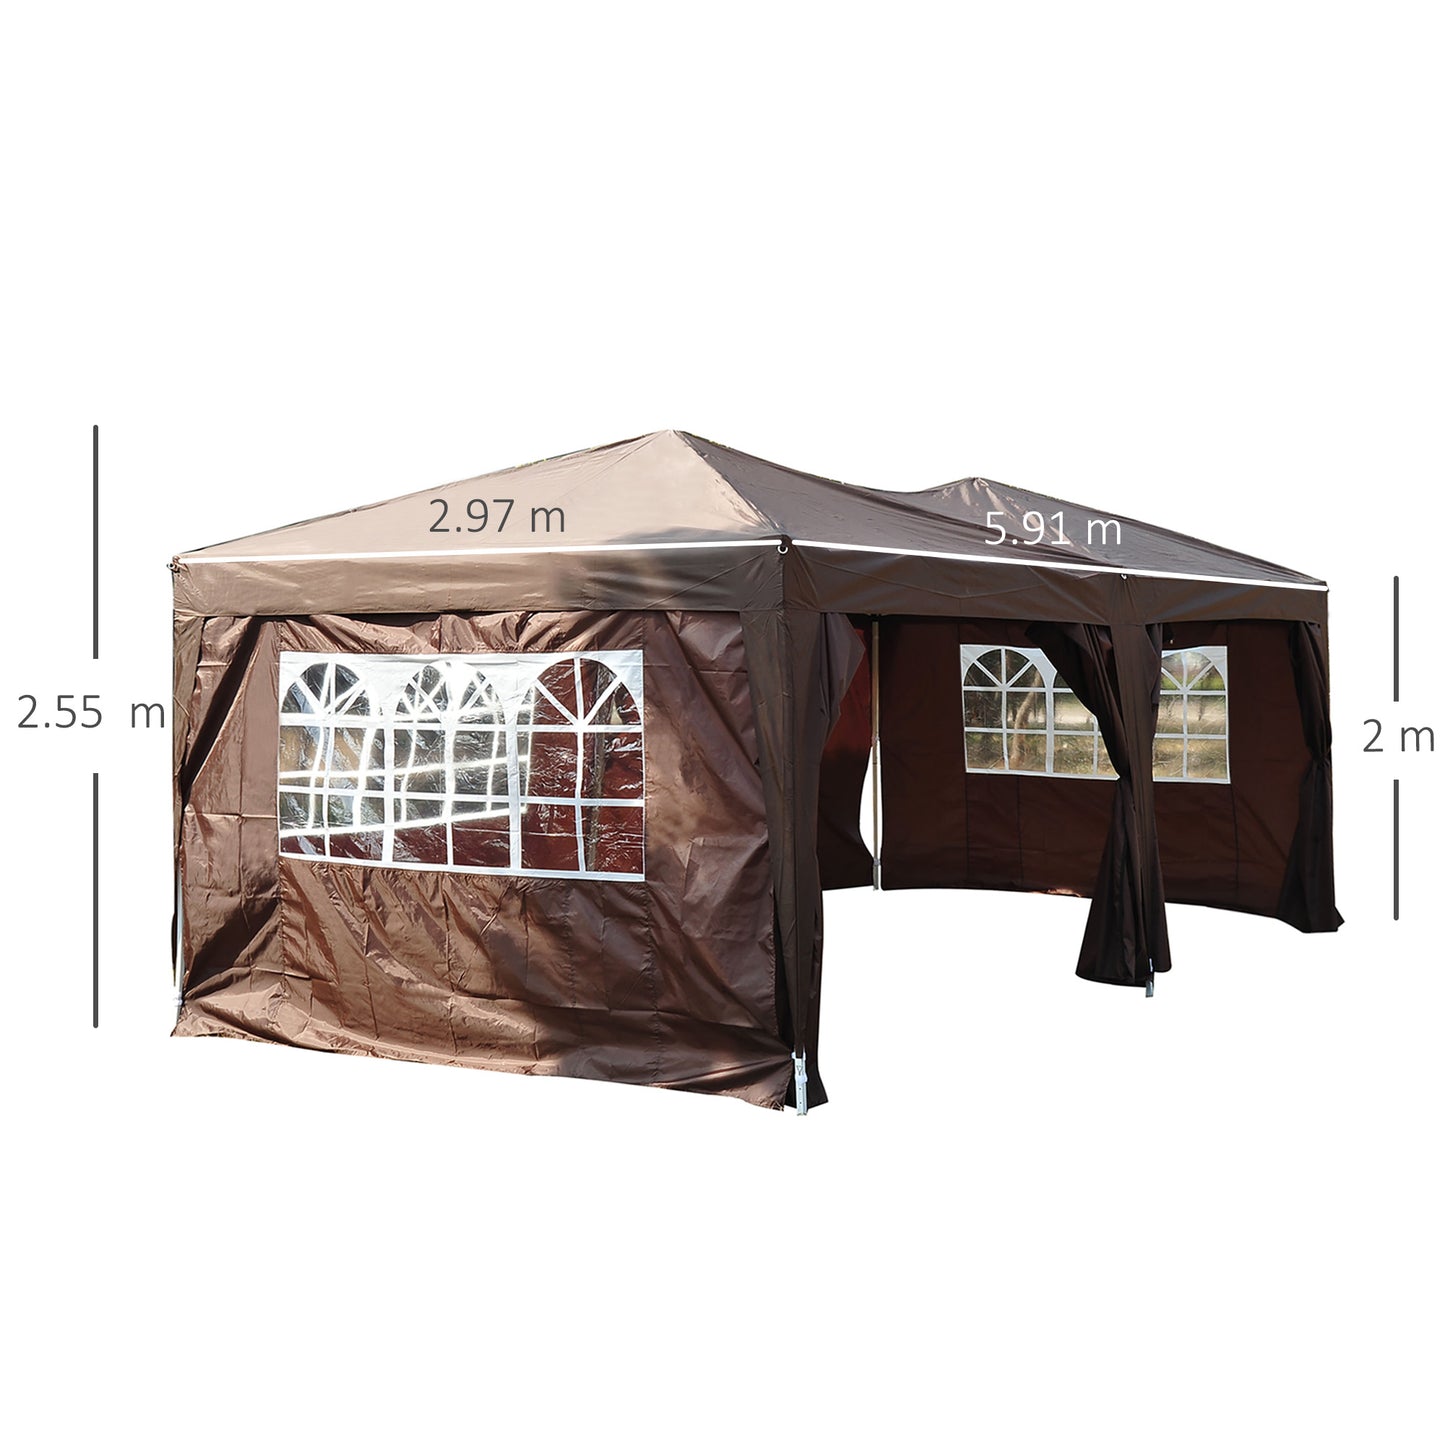 Outsunny Pop Up Gazebo 3 x 6m Garden Heavy Duty Marquee Party Tent Wedding Water Resistant Awning Canopy-Coffee